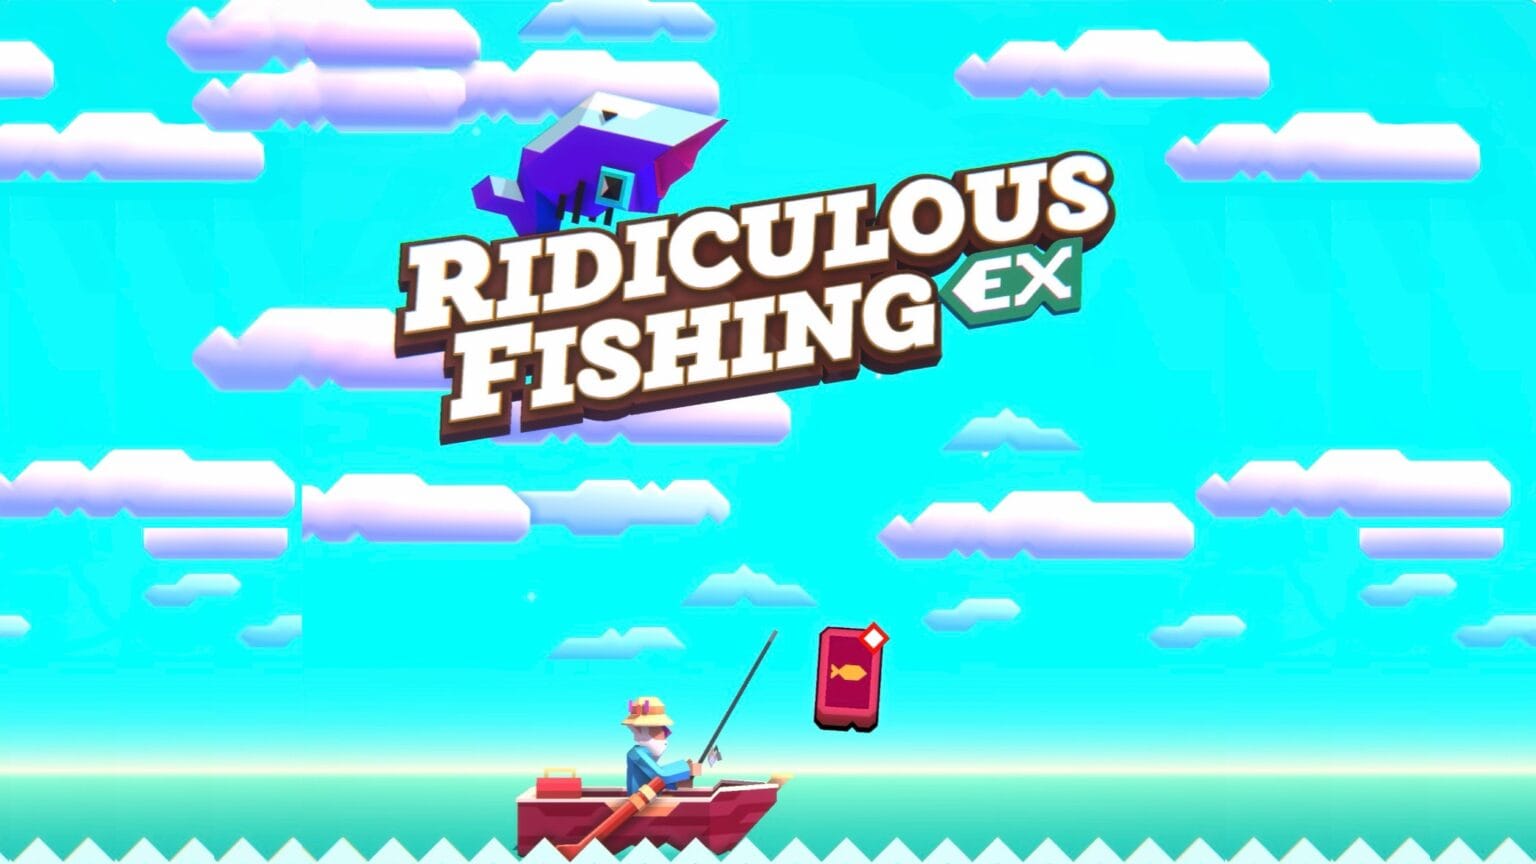 ‘Ridiculous Fishing EX’ offers way more explosions than you might expect